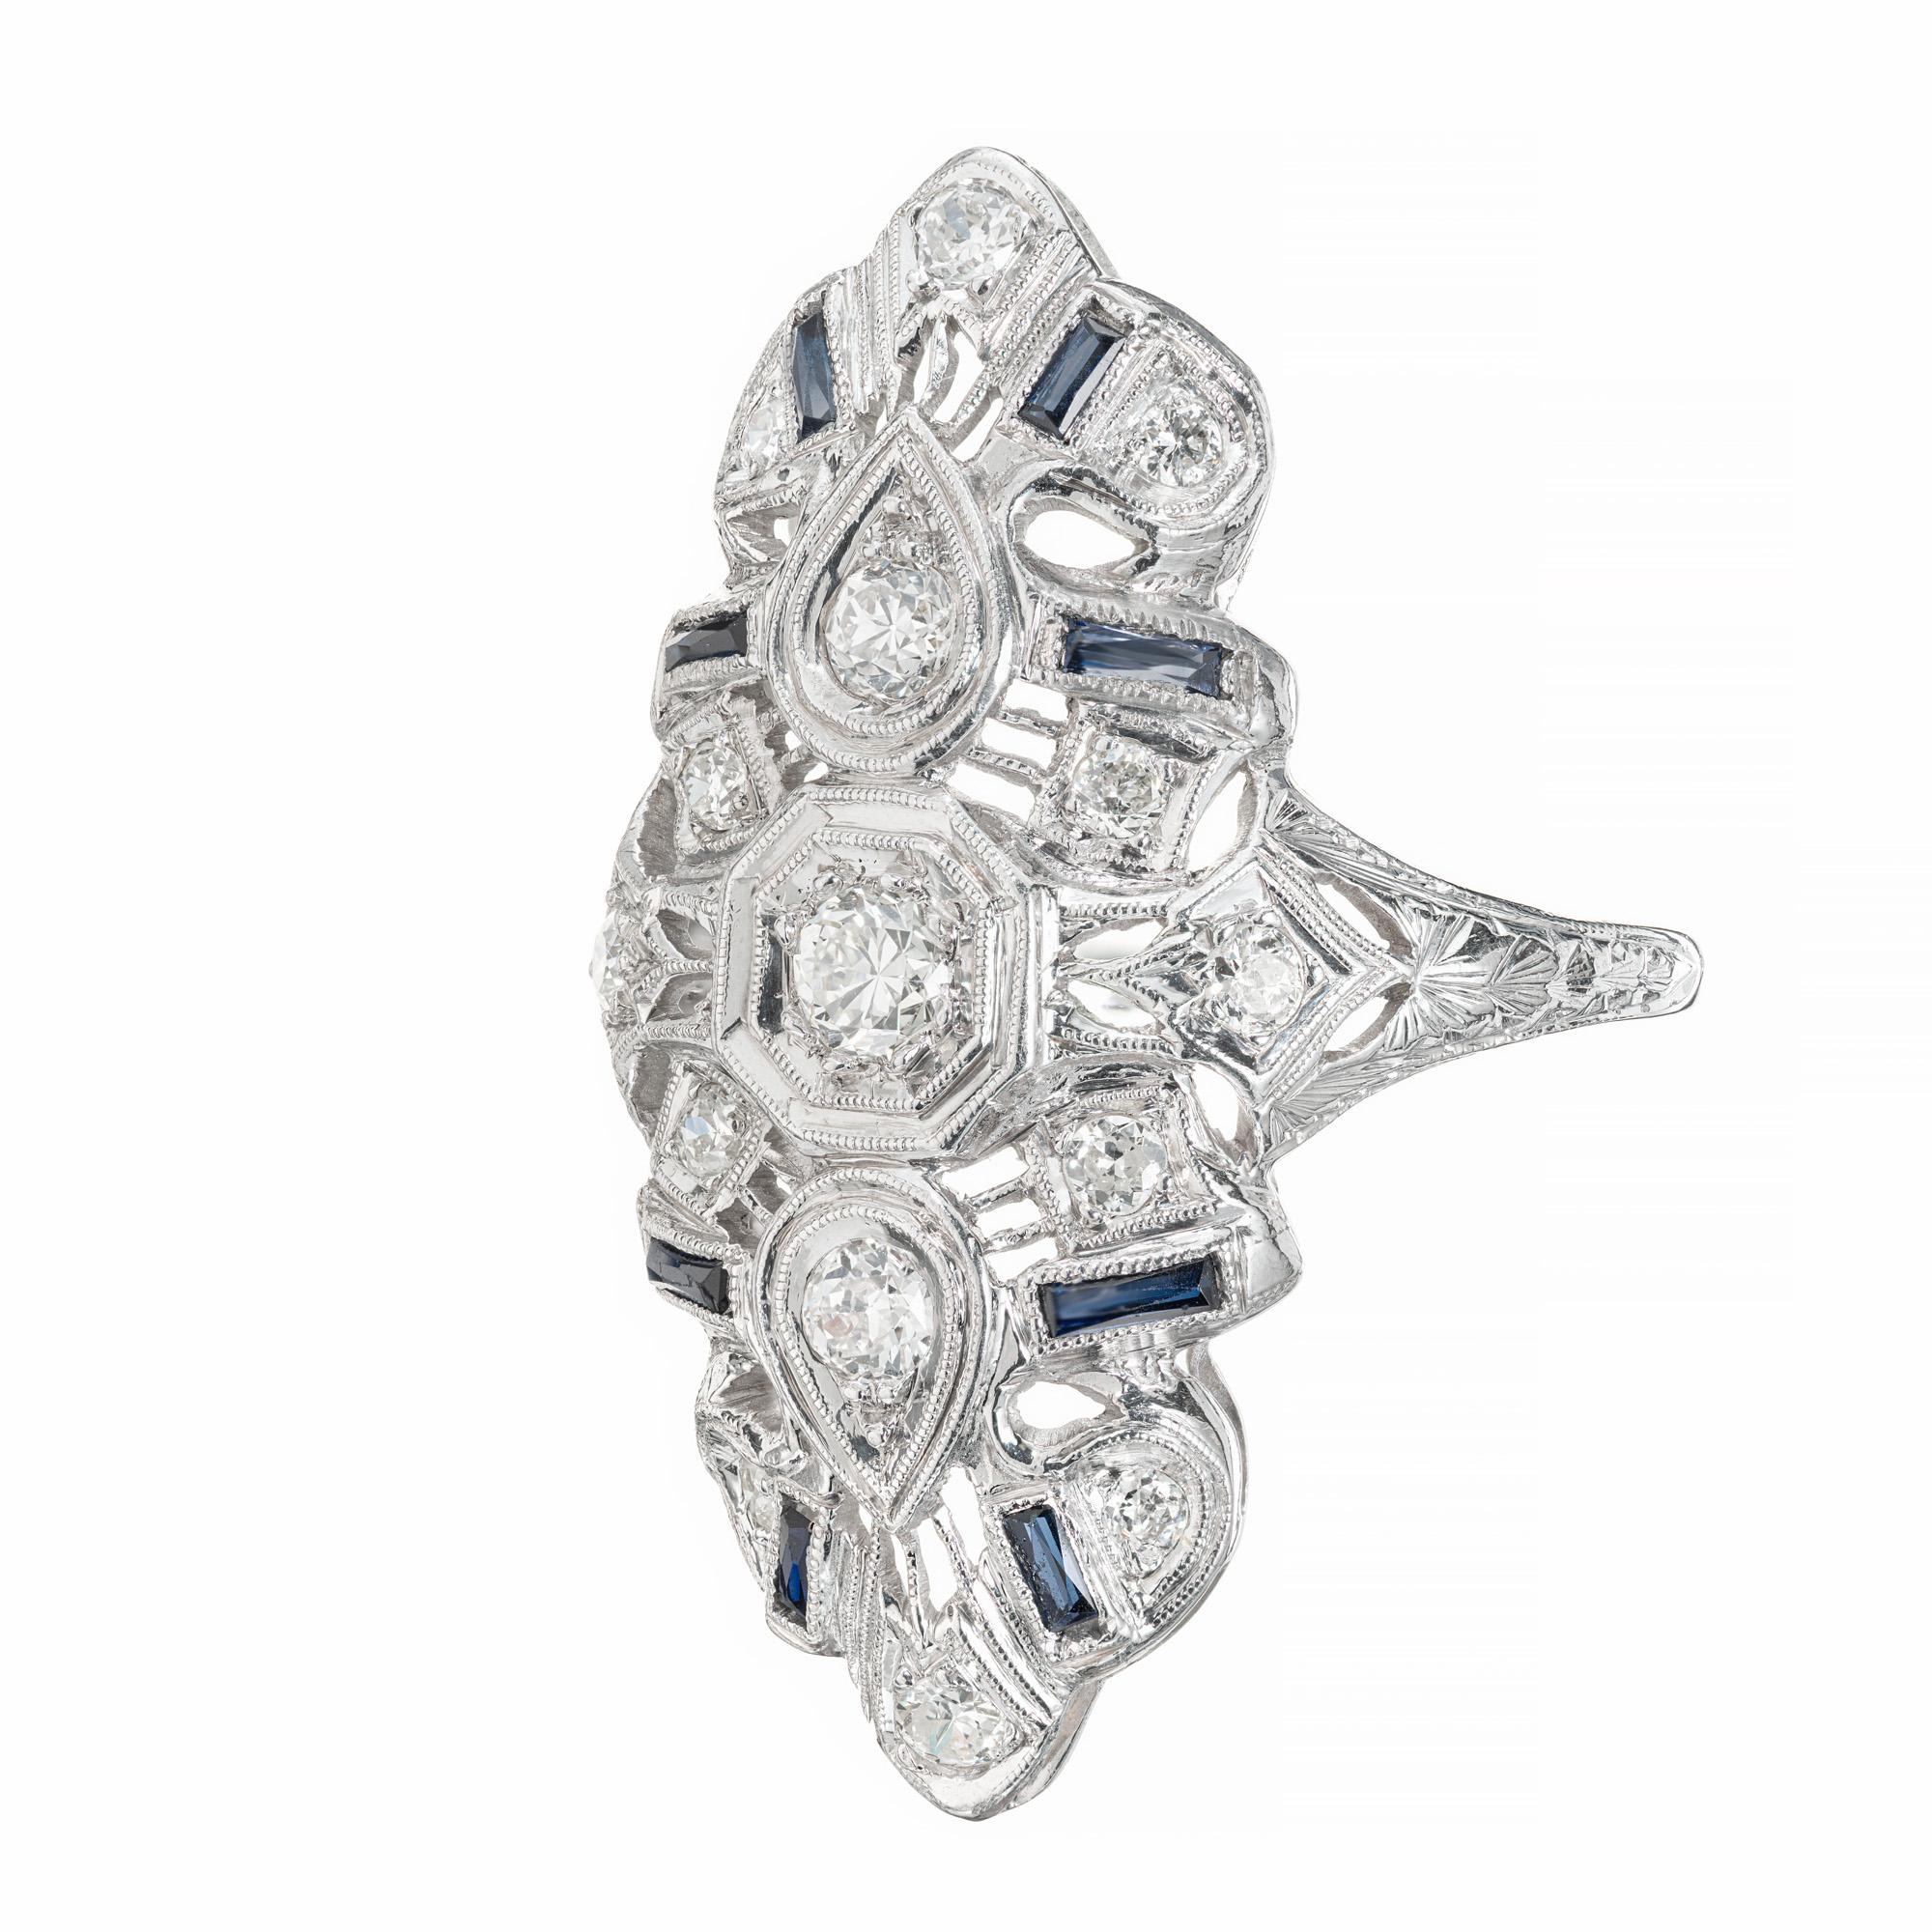 Classic late art deco open work 1930's cocktail ring. 15 round diamonds in a platinum setting accented with 8 French cut baguette sapphires in a platinum setting. 

15 round diamonds, h-I VS SI approx. .44cts
8 French cut blue baguette sapphires,